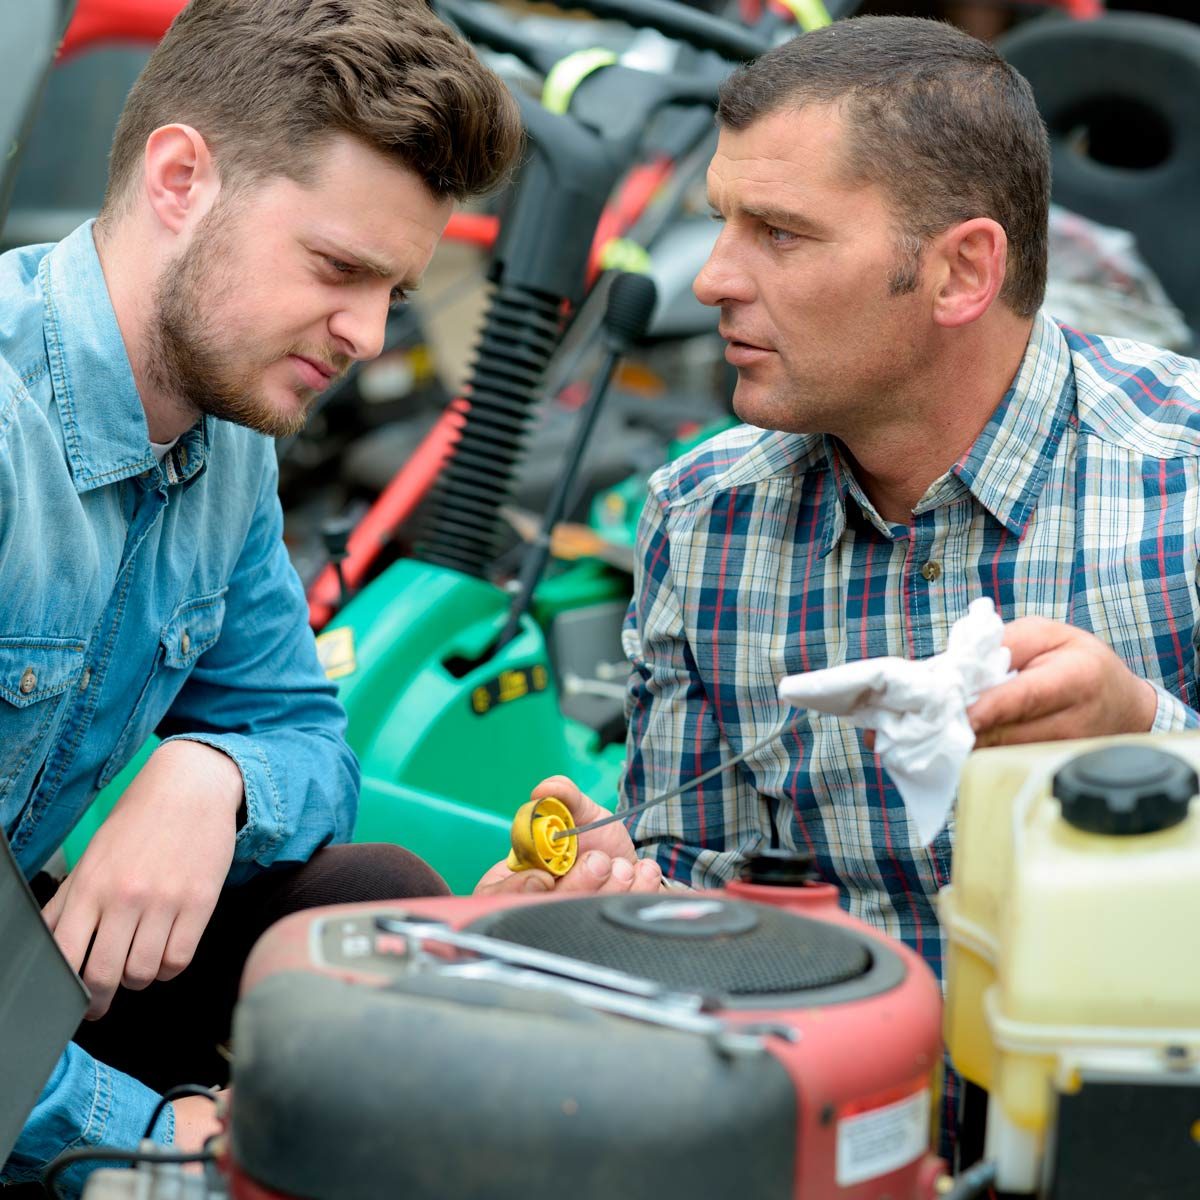 When and How to Change Oil in a Lawn Mower